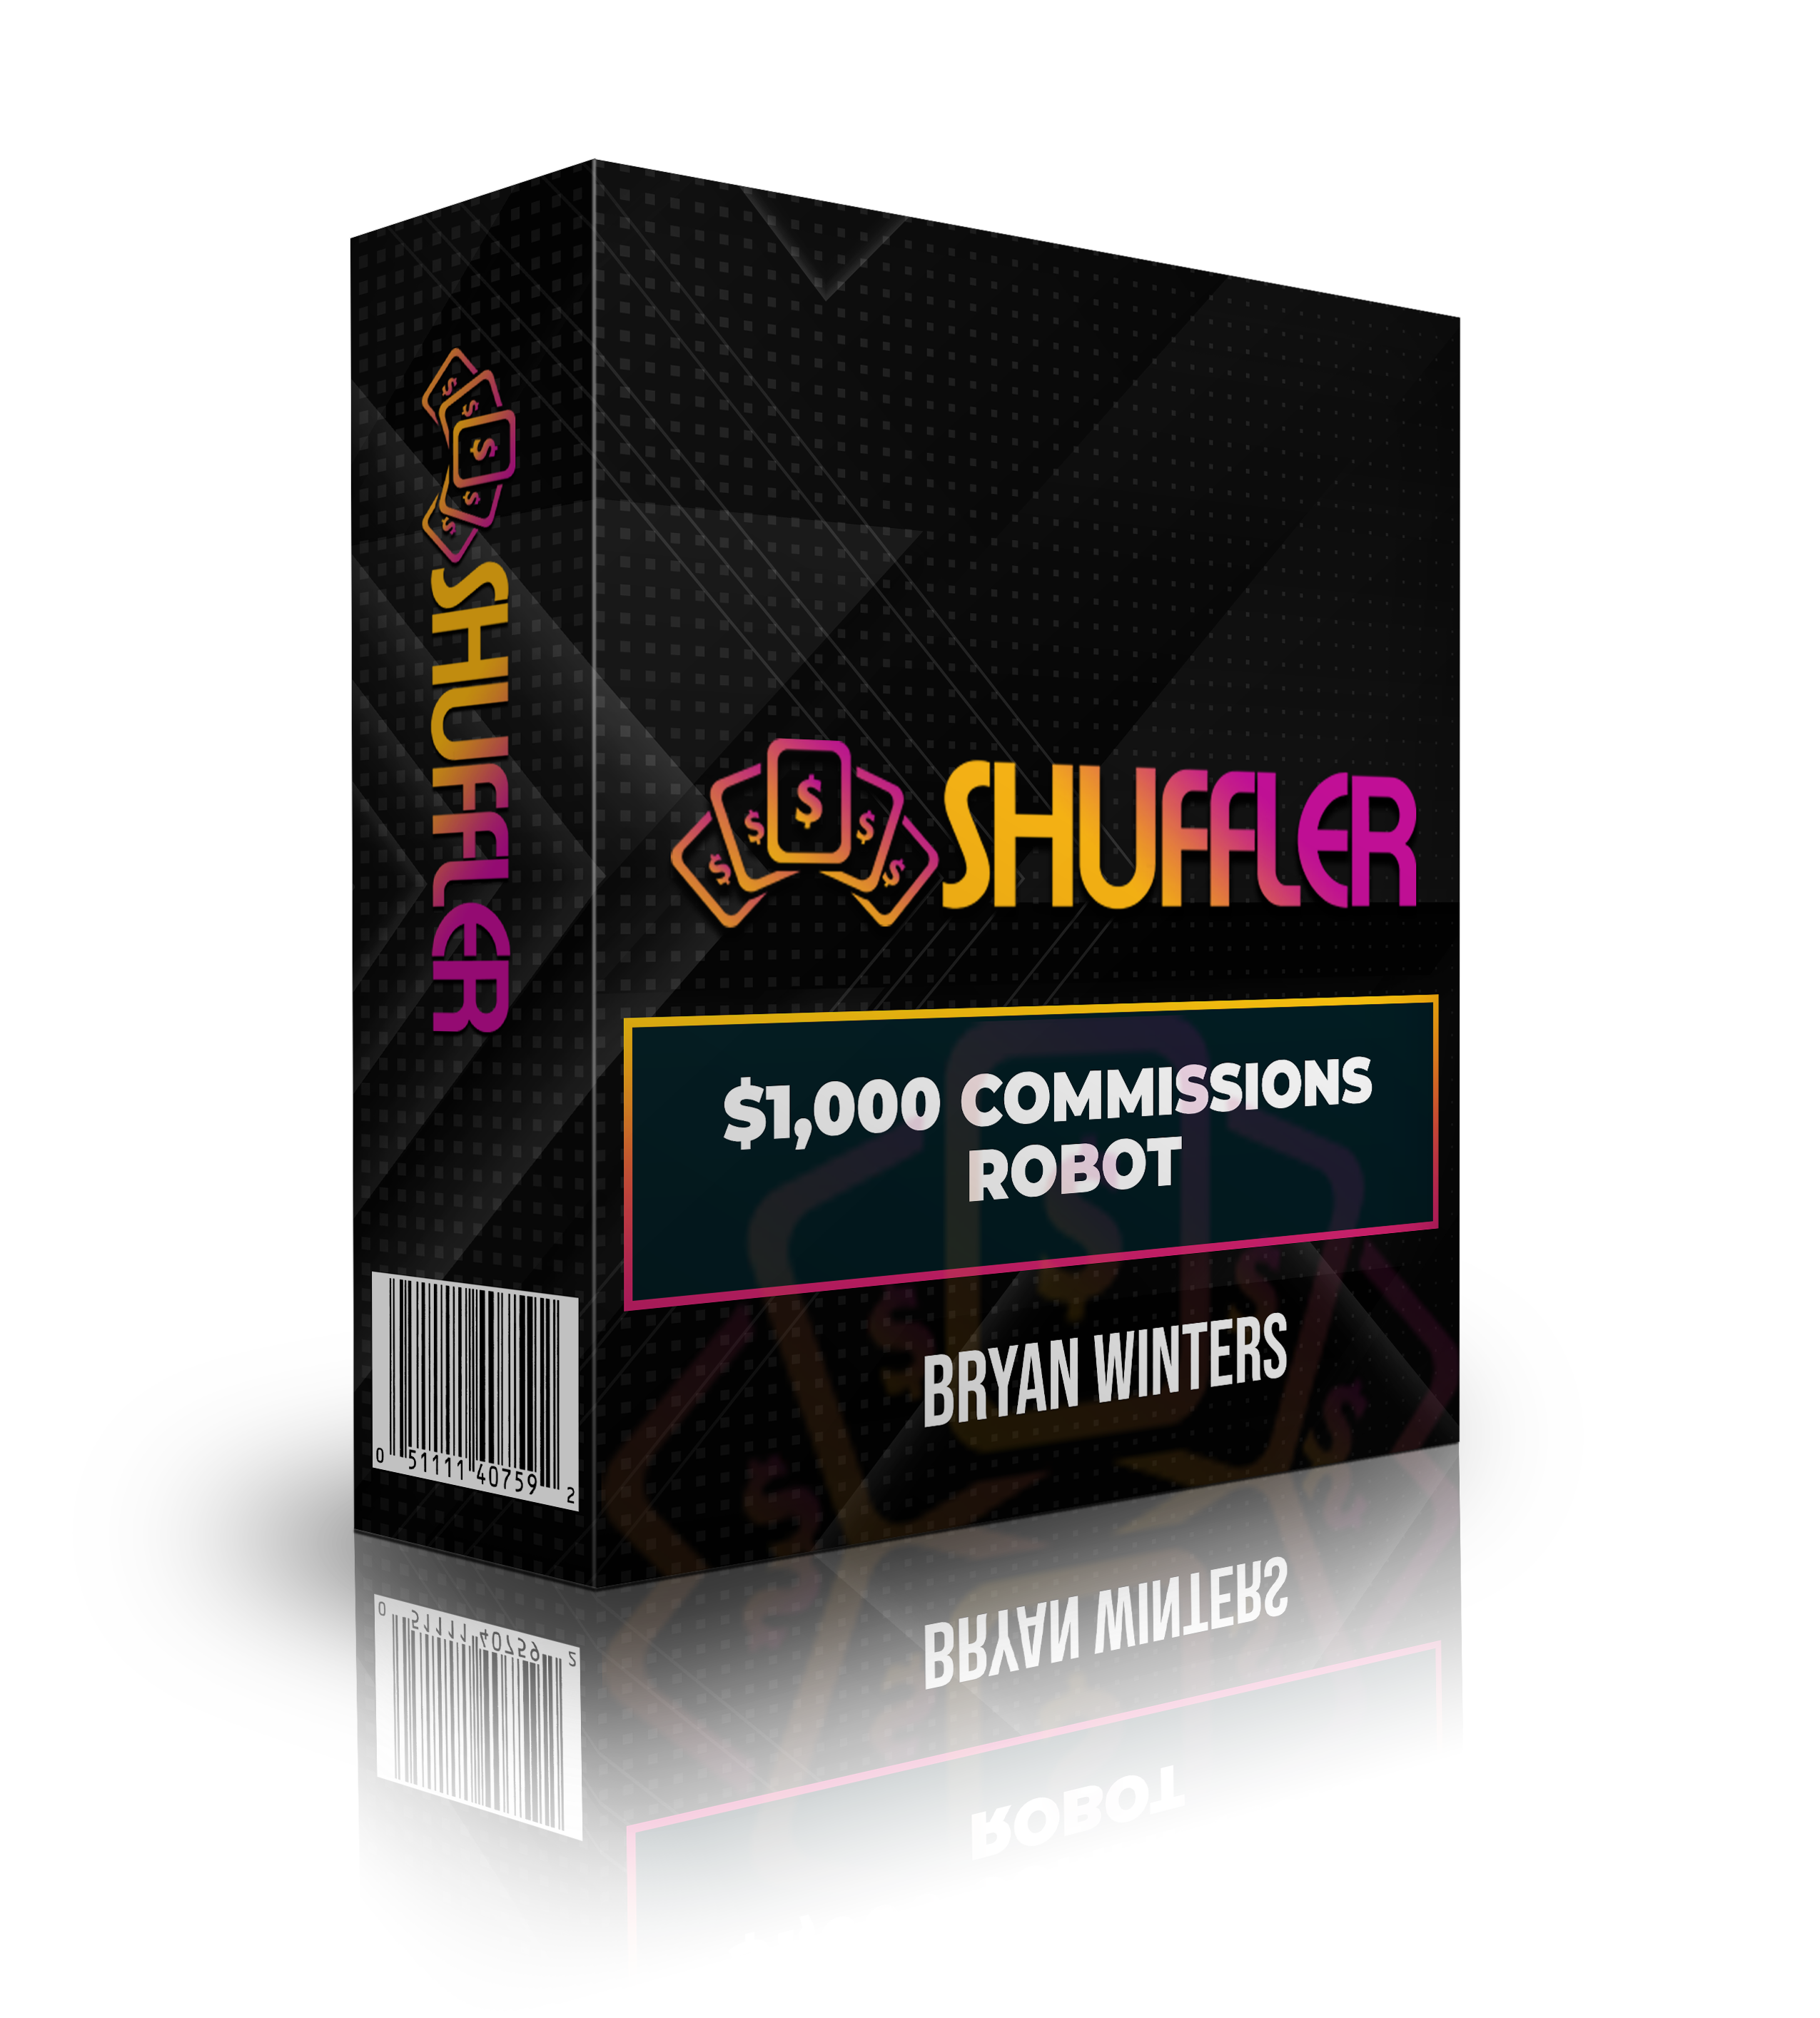 OTO 5 - SHUFFLER'S $1,000 COMMISSIONS ROBOT - $197 With $97 Downsell. Our final upgrade instantly unlocks backend commission payouts of $1000+ a pop on a built-in auto webinar integrated into all SHUFFLER user apps/websites. Our built-in high ticket webinar upgrades are very popular with our users, and we like to mix things up by offering different webinars across different launch products.